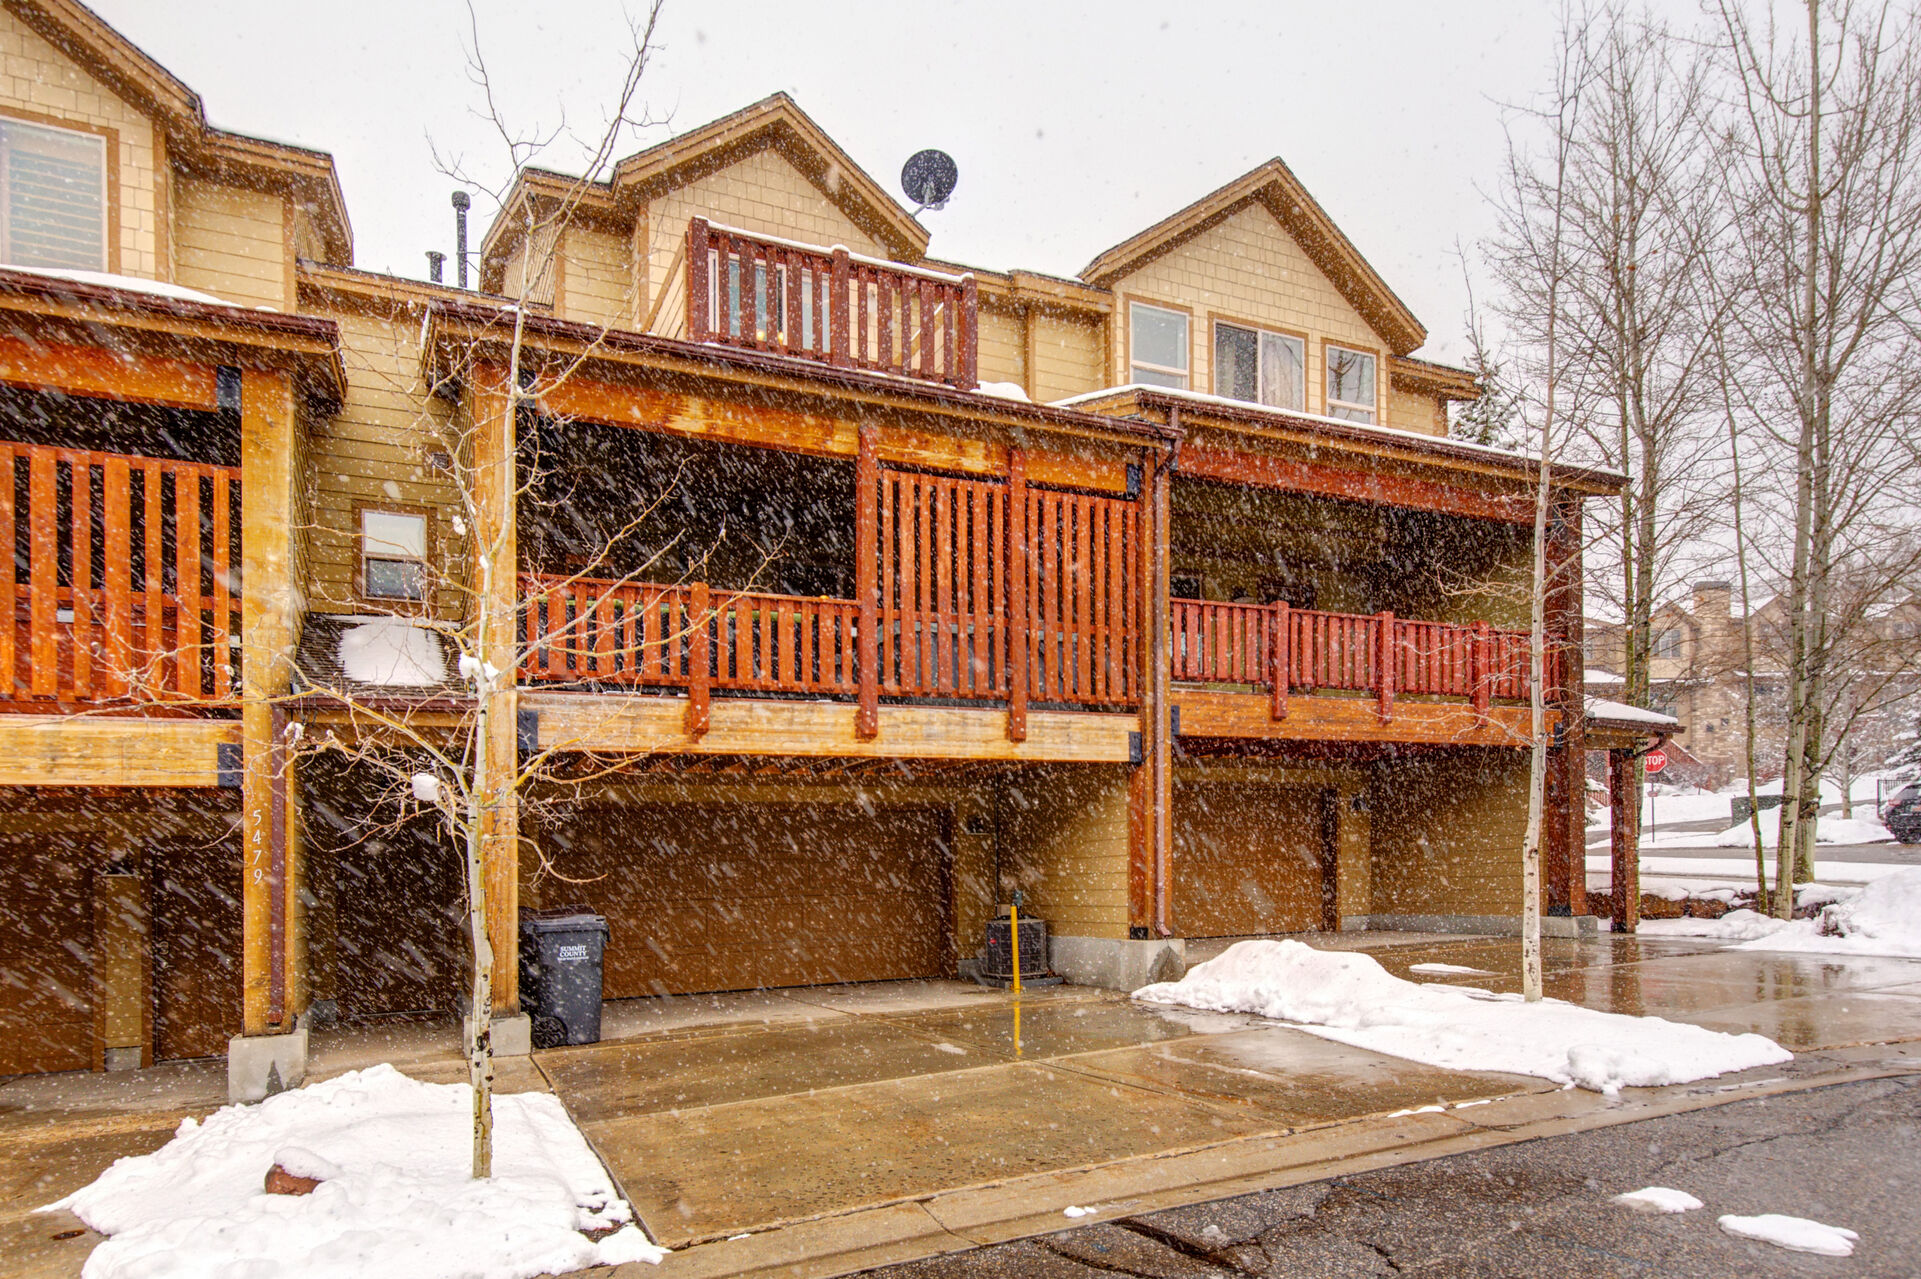 Rear Exterior.  2 parking spots available in driveway, first come first serve parking on the road., Main Level Private Deck with Patio Seating, a BBQ and Hot Tub, and Master Bedroom Private Deck